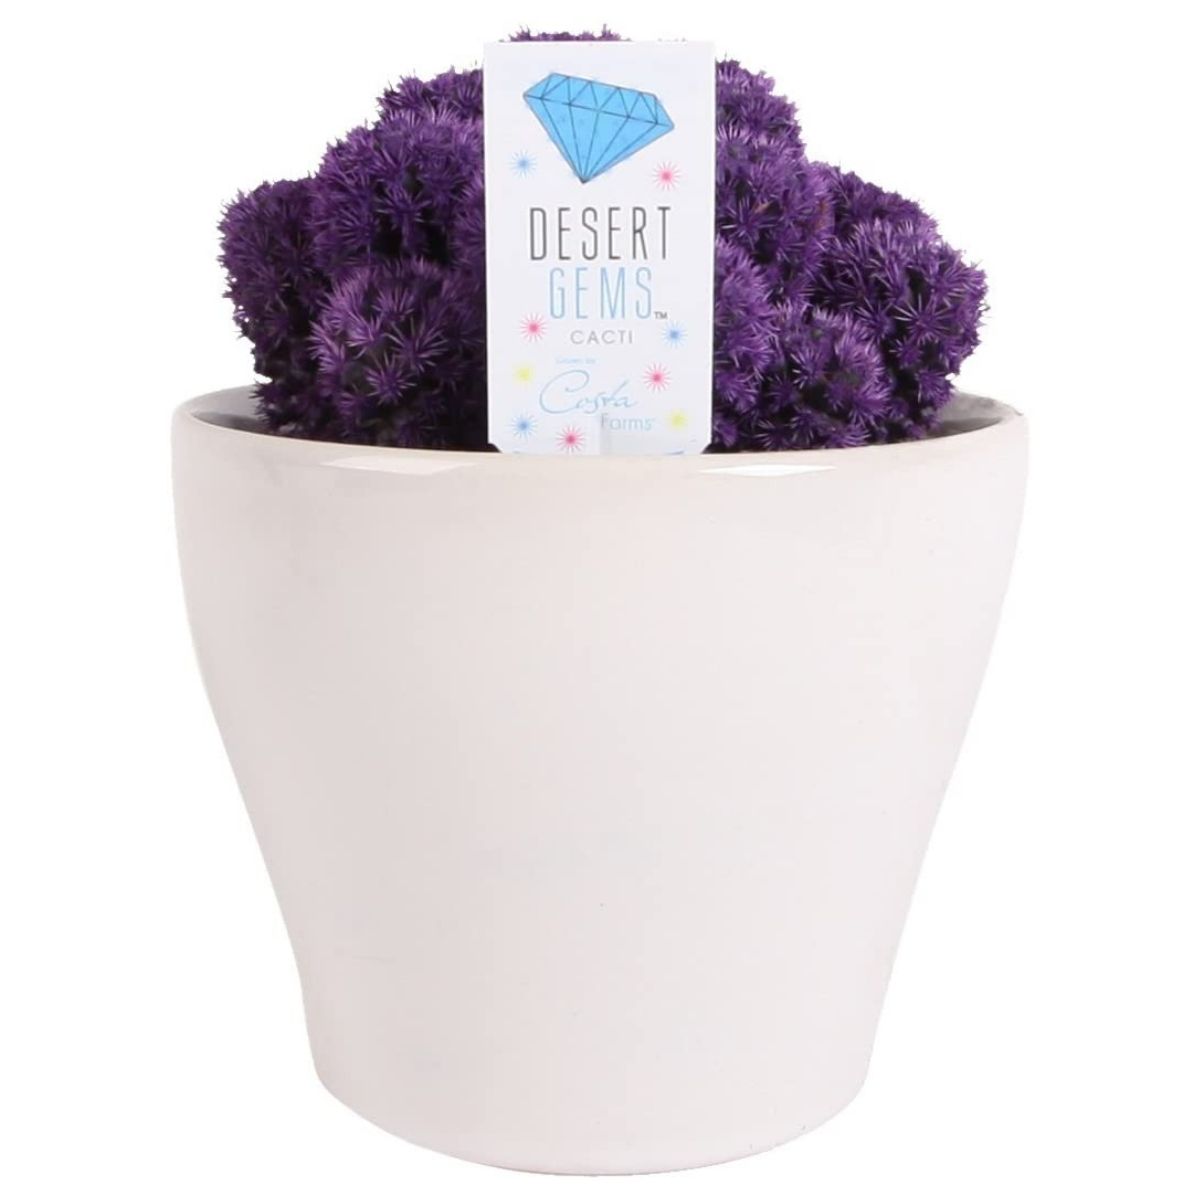 The Best Home Office Gifts Option: Costa Farms, Live Indoor Desert Gems Purple Cacti